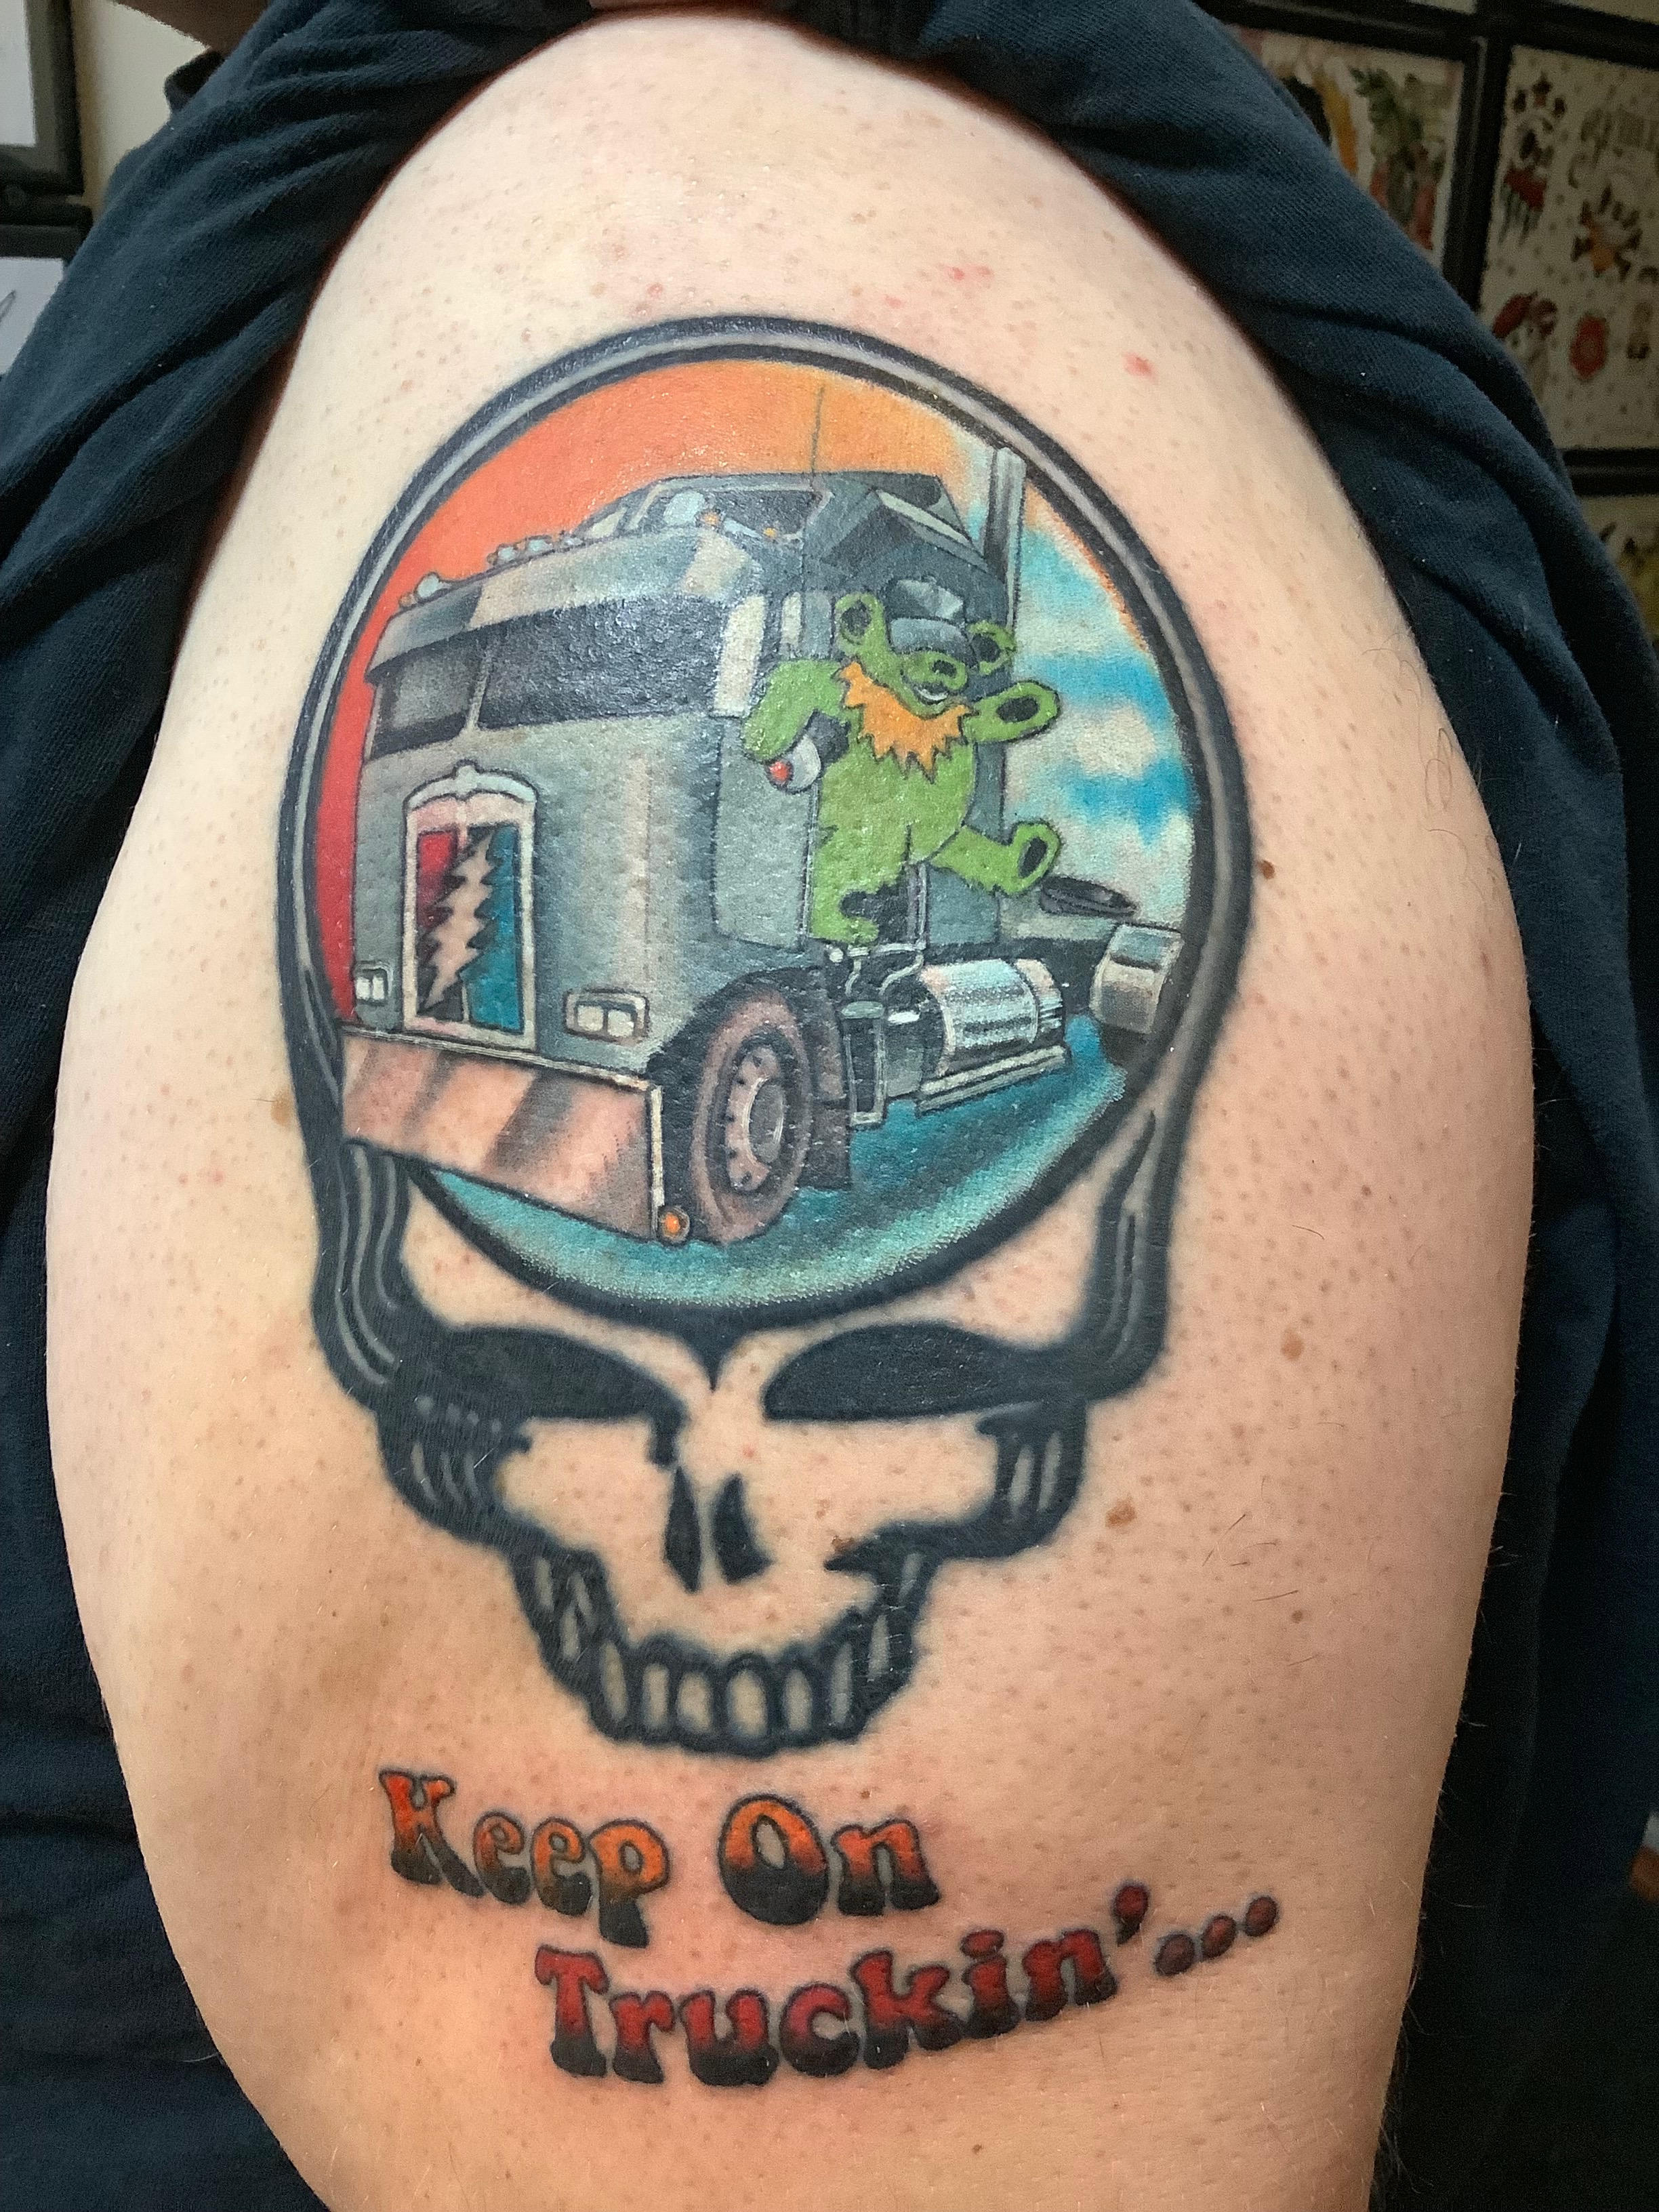 DAF Trucks UK  on Twitter David paid tribute to his father Dave who  very sadly passed away by getting his fathers truck tattooed to him Dave  was a proud trucker and